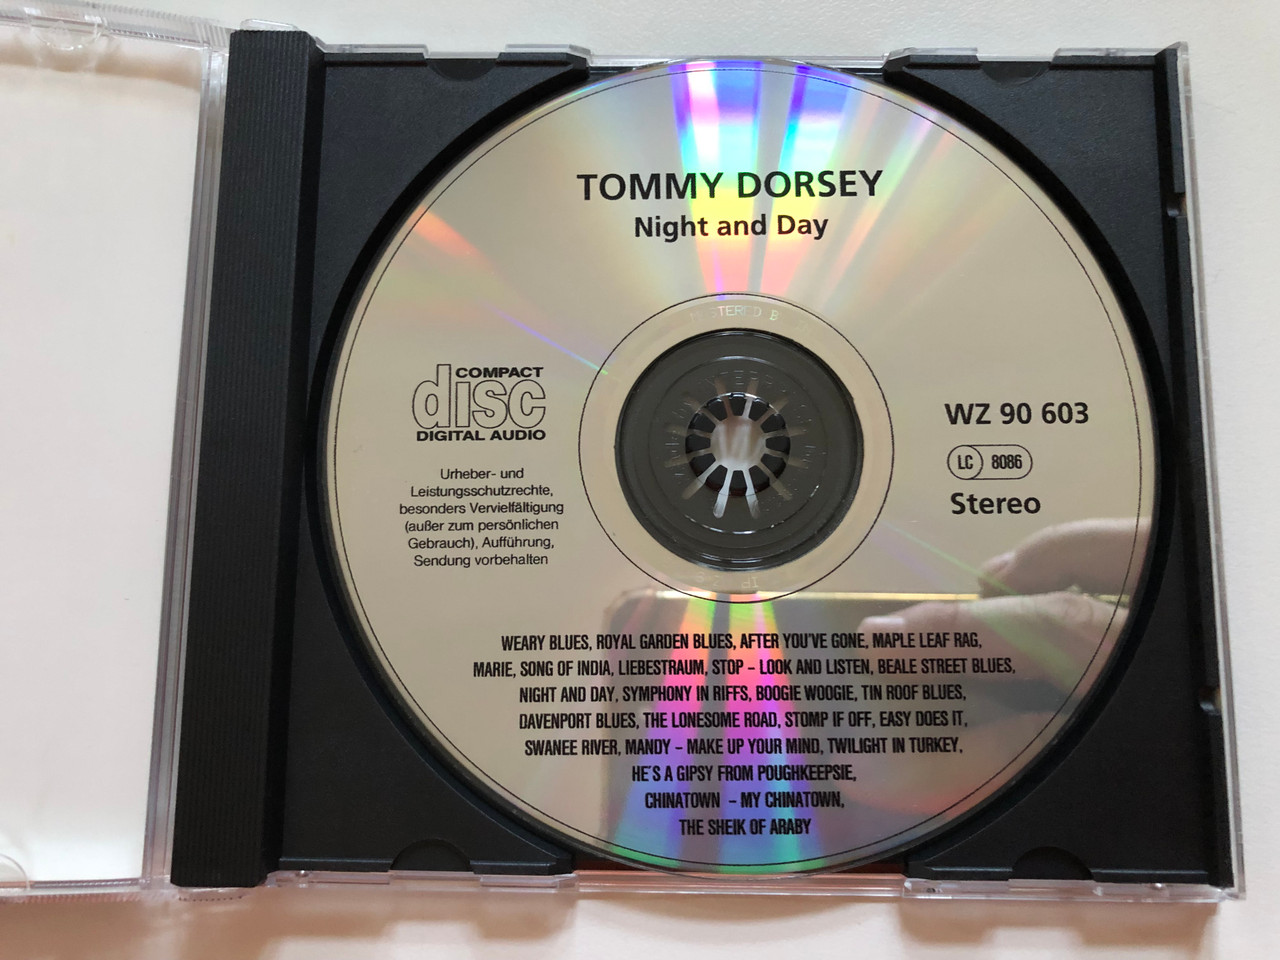 https://cdn10.bigcommerce.com/s-62bdpkt7pb/products/0/images/259193/Special_Jazz_Collection_-_Tommy_Dorsey_and_his_Orchestra_-_Night_And_Day_Weary_Blues_After_Youve_Gone_Royal_Garden_Blues_Maple_Leaf_Rag_Marie_Song_Of_India..._Digital_Mastering_WZ__00985.1669116379.1280.1280.JPG?c=2&_gl=1*tt71nf*_ga*MjA2NTIxMjE2MC4xNTkwNTEyNTMy*_ga_WS2VZYPC6G*MTY2OTEwODAwNS42MzcuMS4xNjY5MTE2MzE4LjYwLjAuMA..